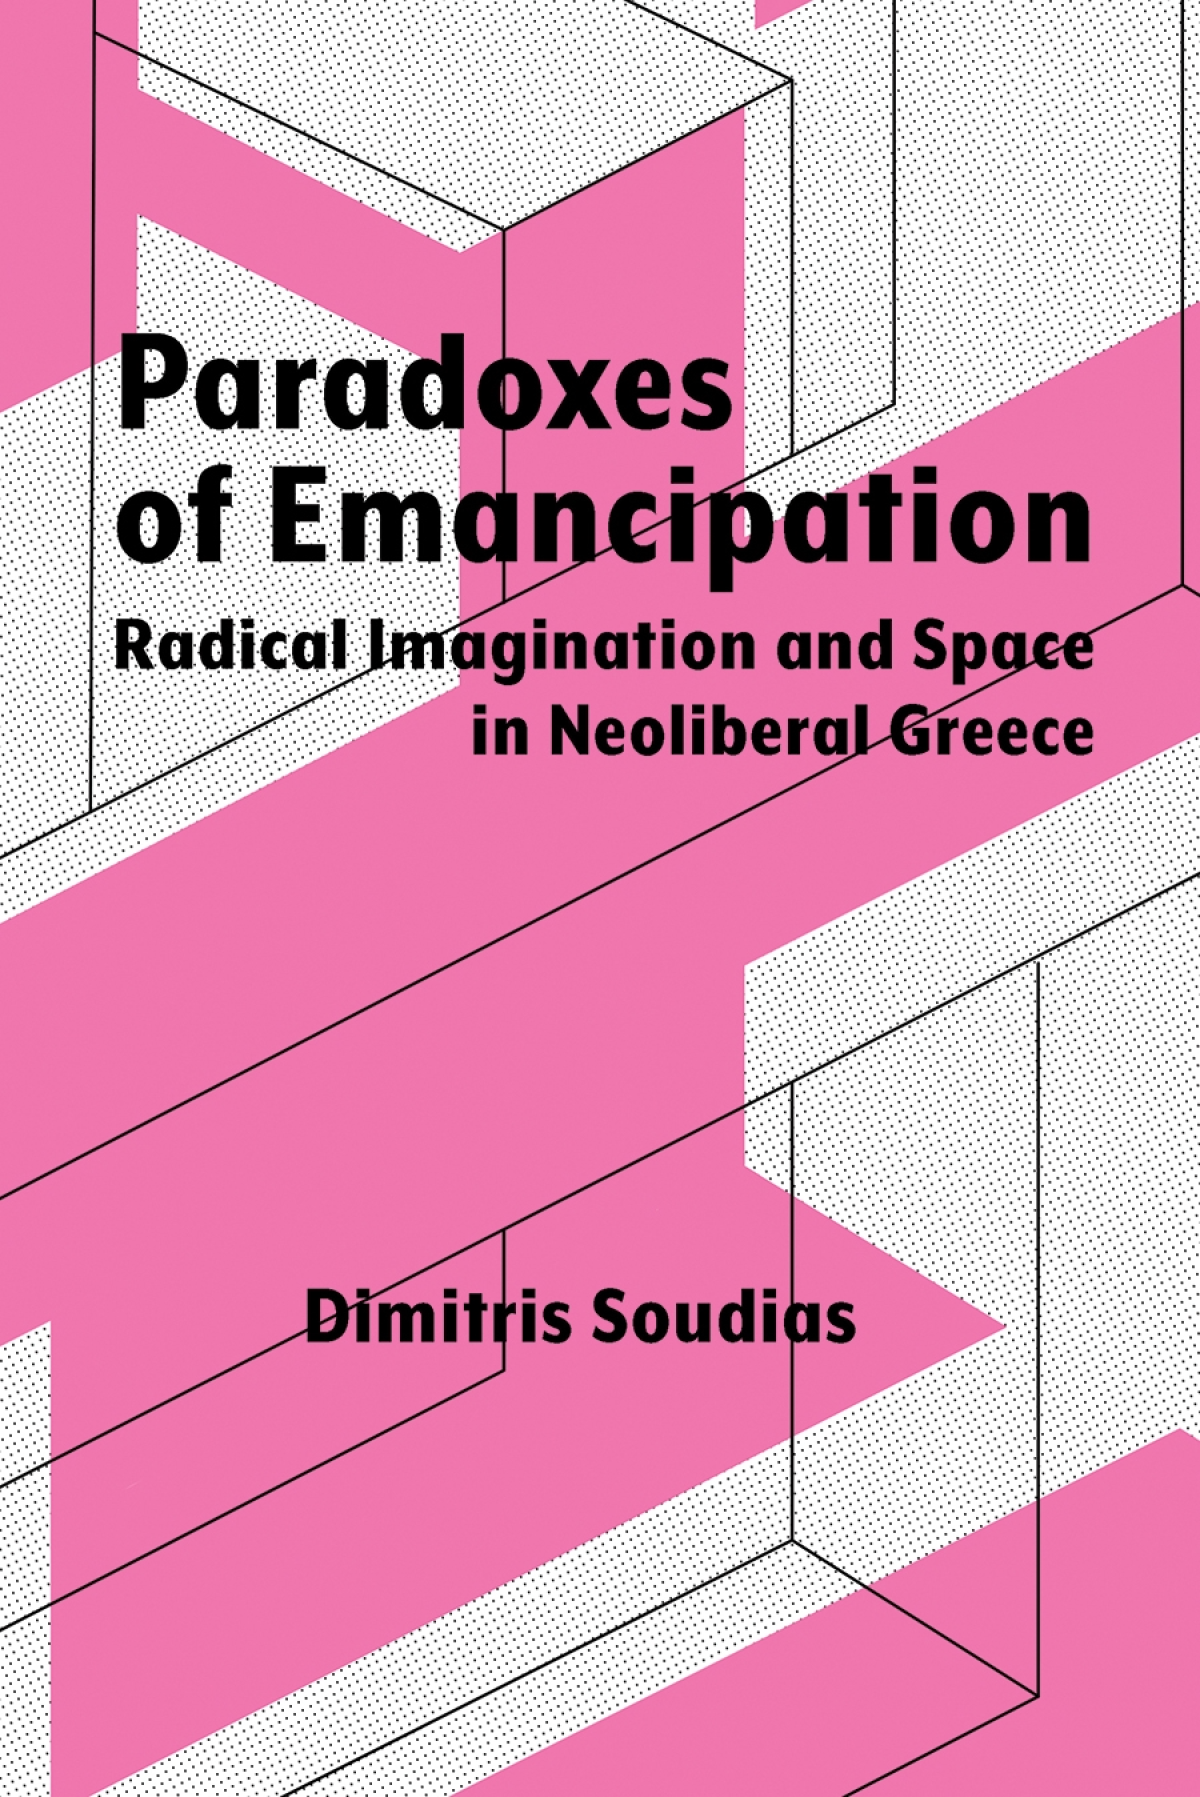 Cover of Dimitris Soudias's book Paradoxes of Emancipation. The cover is pink and white with geometrical shapes.